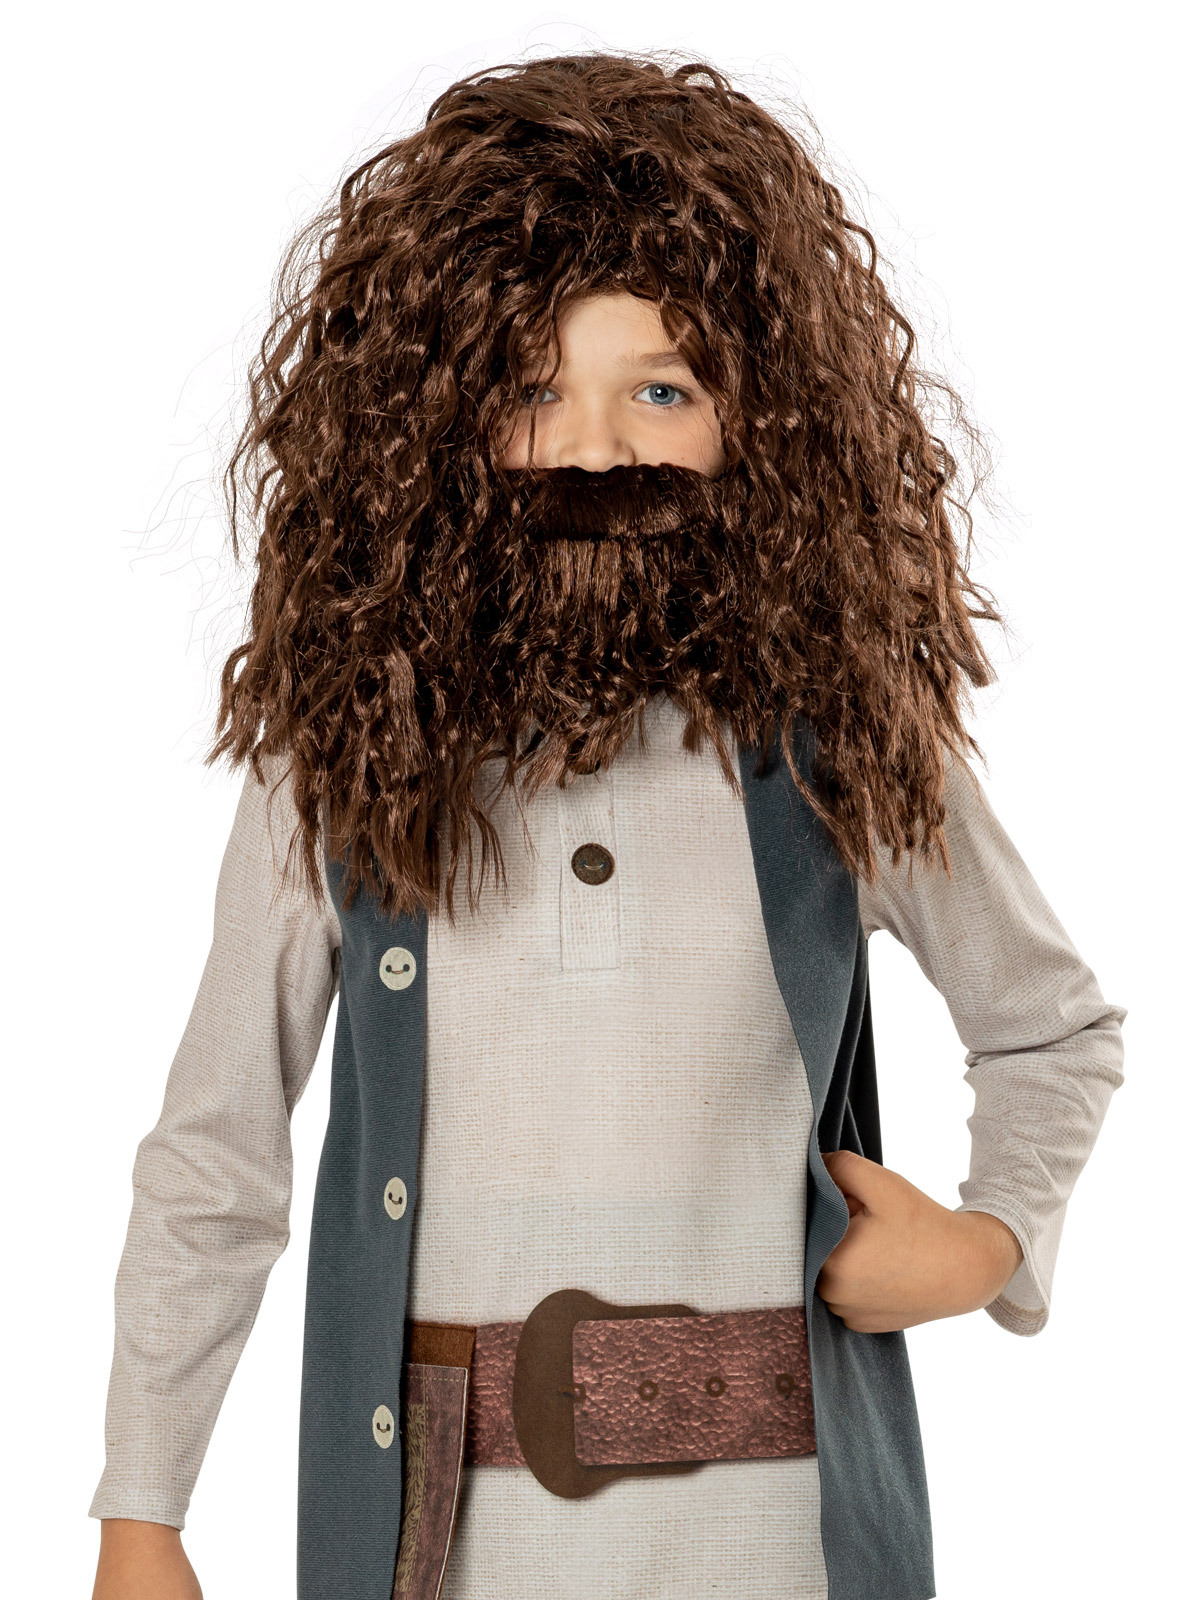 Hagrid Child Costume from Harry Potter